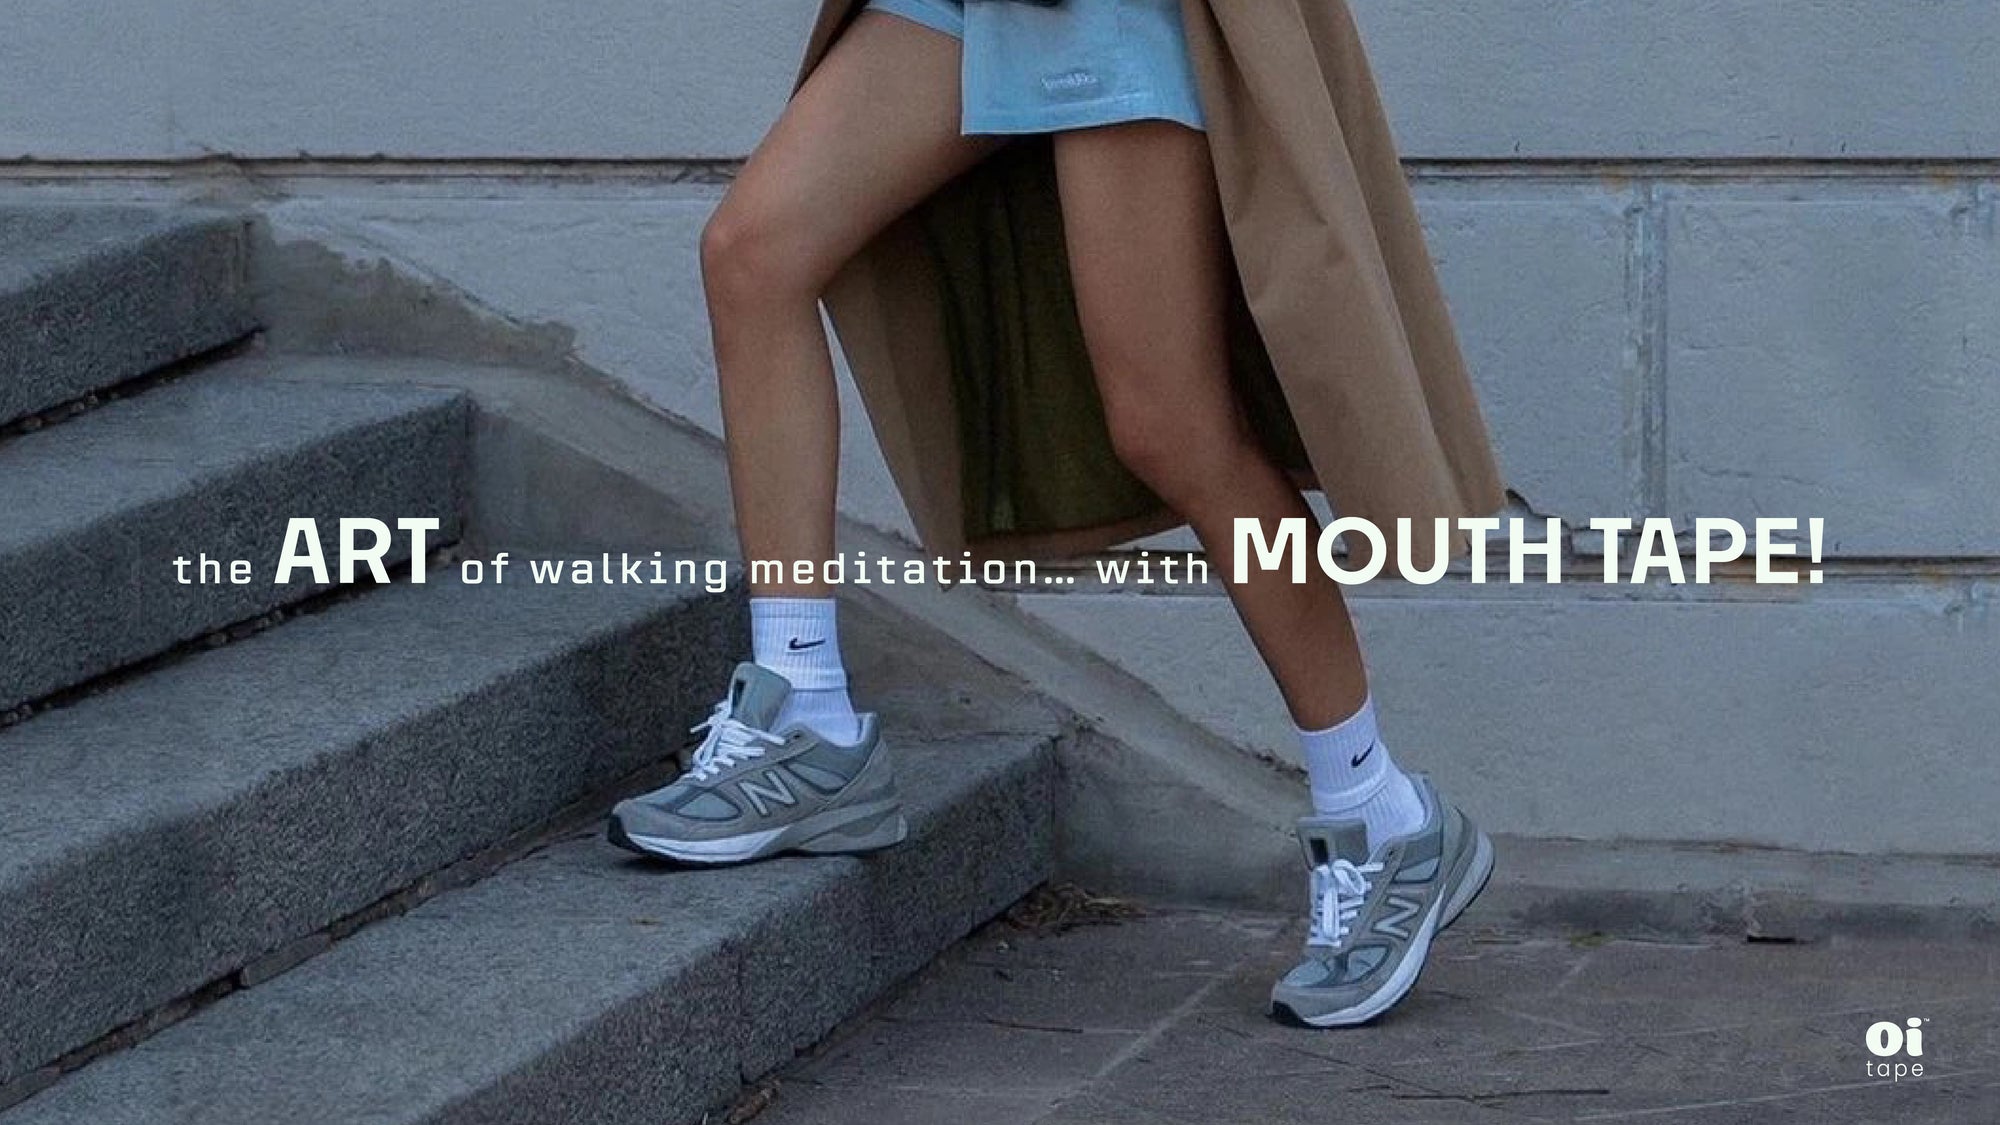 The art of the walking meditation...with mouth tape!